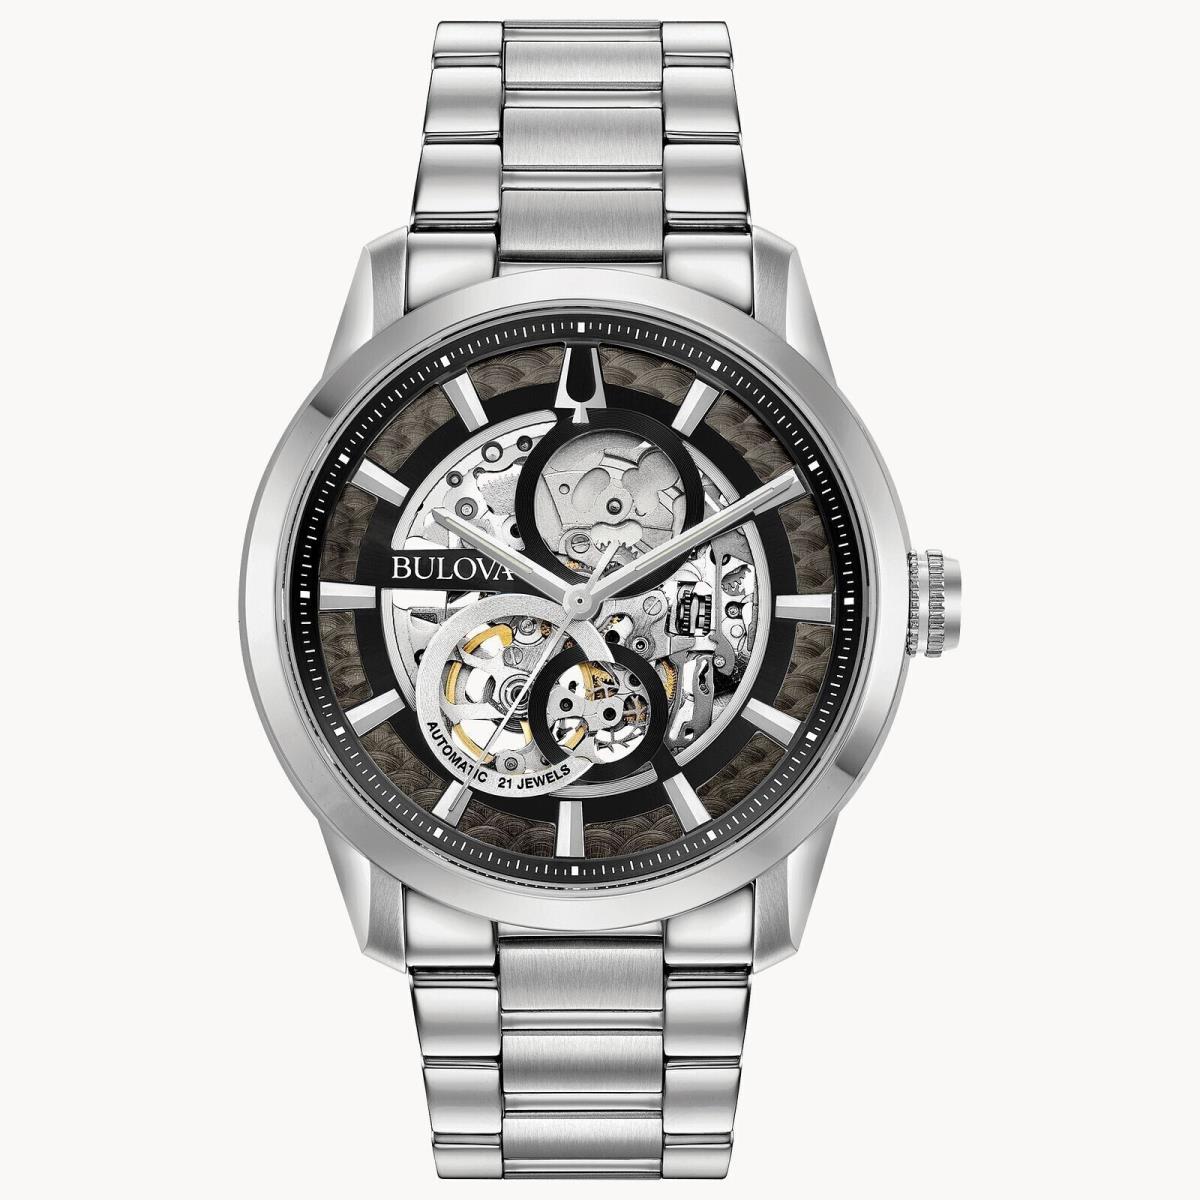 Bulova Men`s Classic Sutton Stainless Steel Automatic Watch Skeleton 96A208 - Silver-Tone/Black dial, Dial: Black, Band: Silver